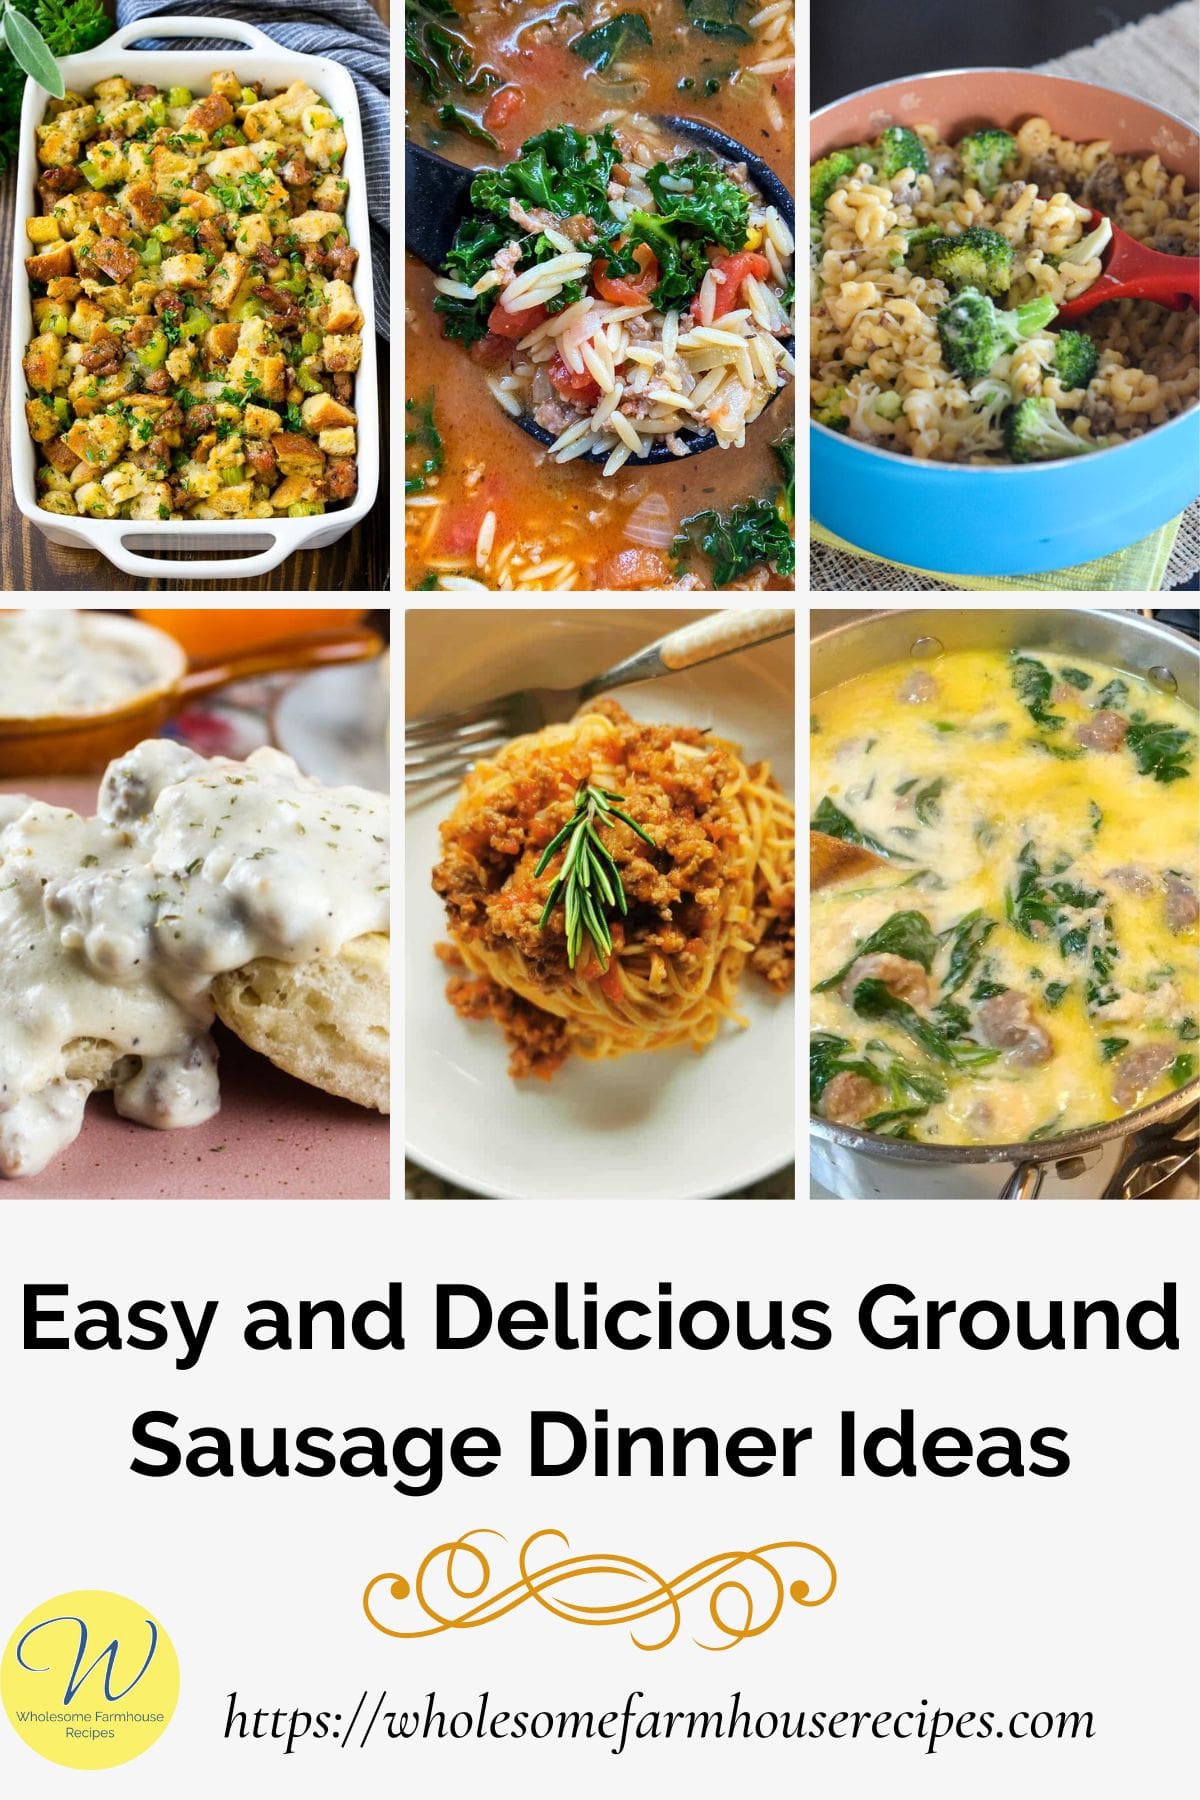 Easy and Delicious Ground Sausage Dinner Ideas